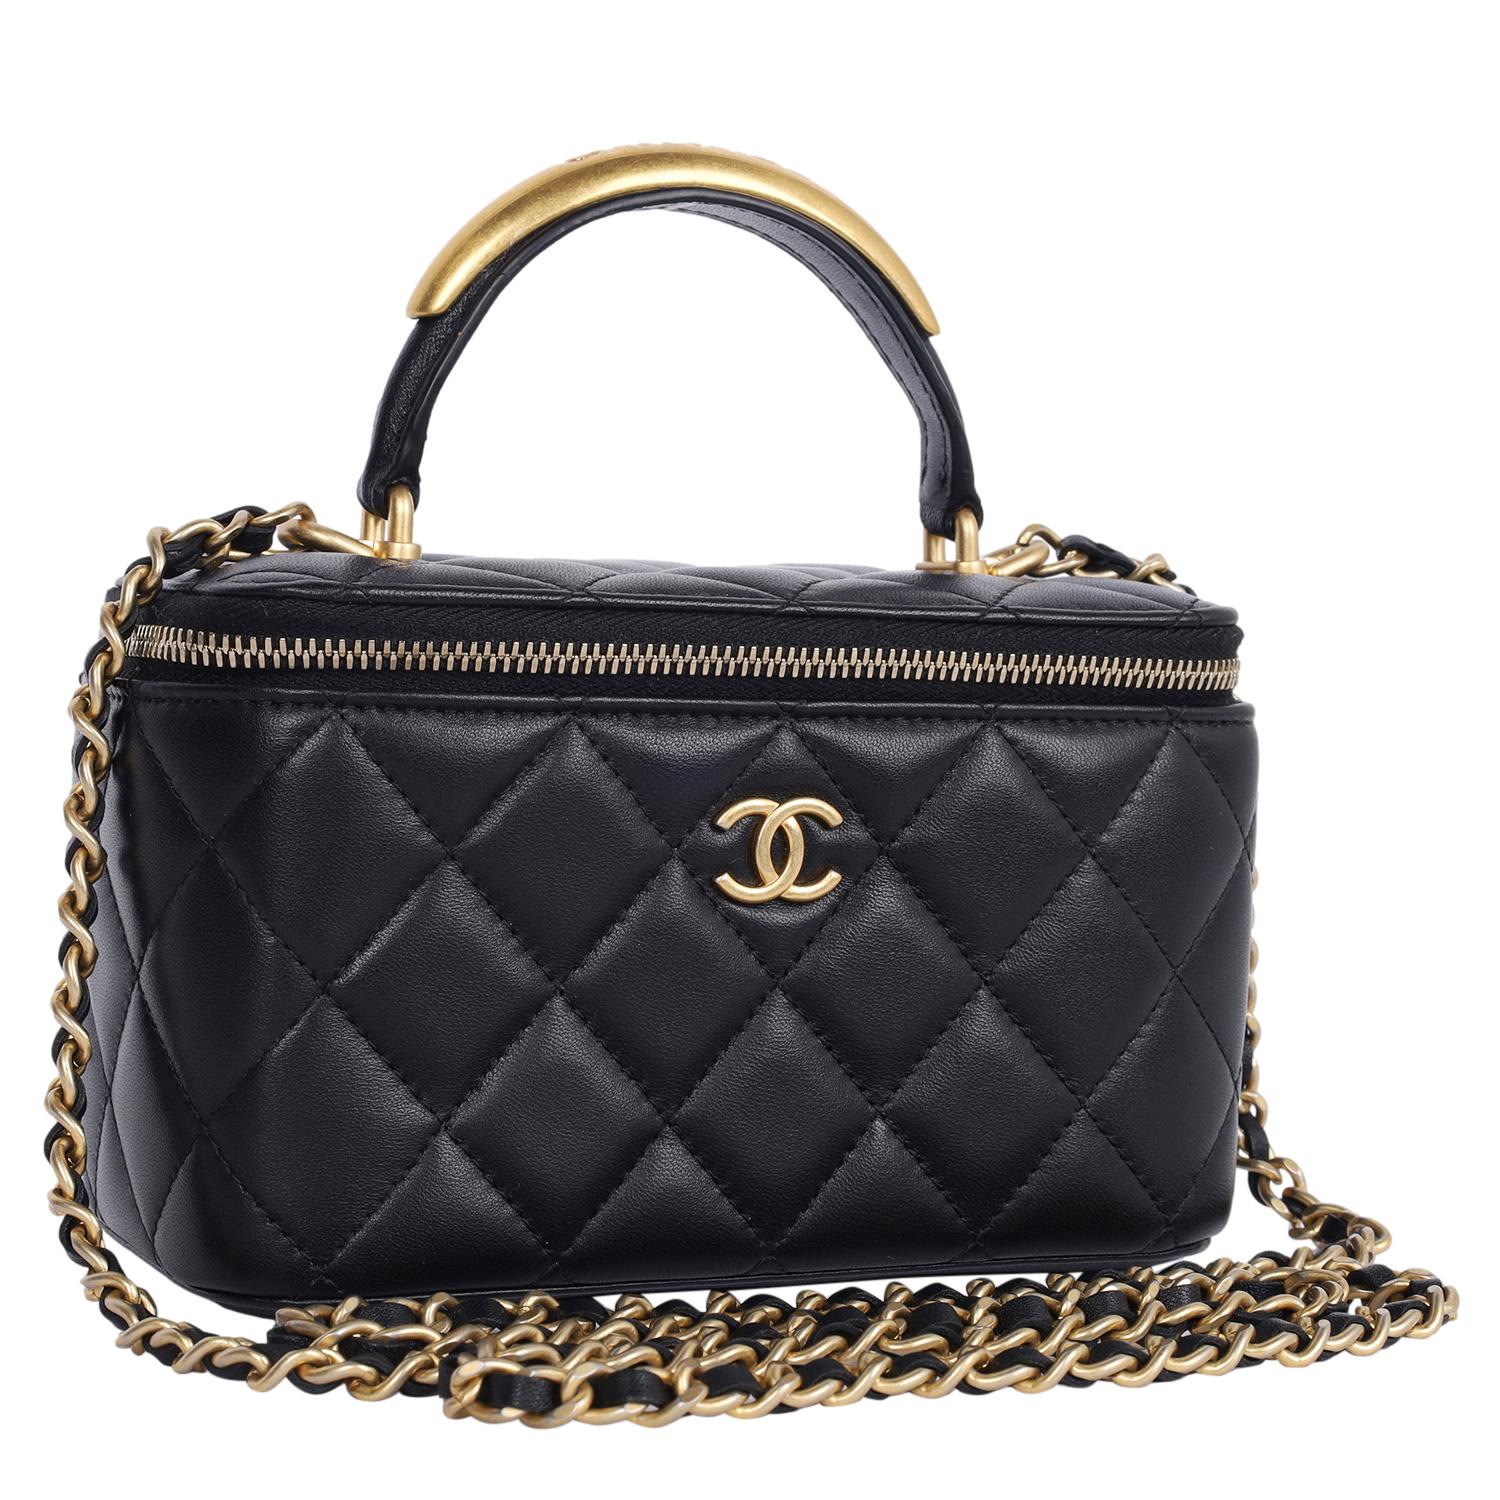 Chanel Lambskin Quilted Small Top Handle Vanity Case Black Crossbody Bag 1